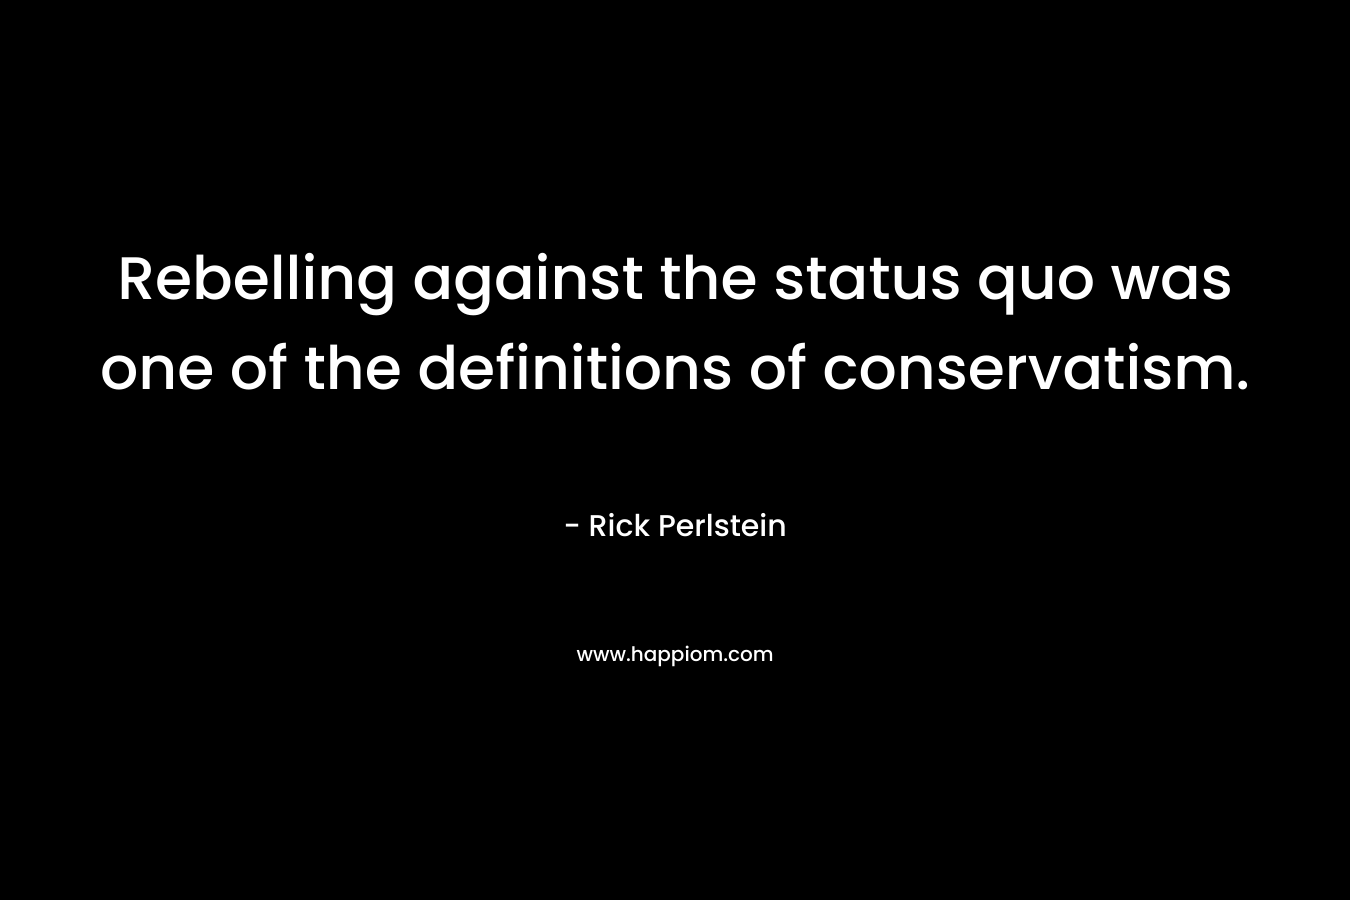 Rebelling against the status quo was one of the definitions of conservatism. – Rick Perlstein